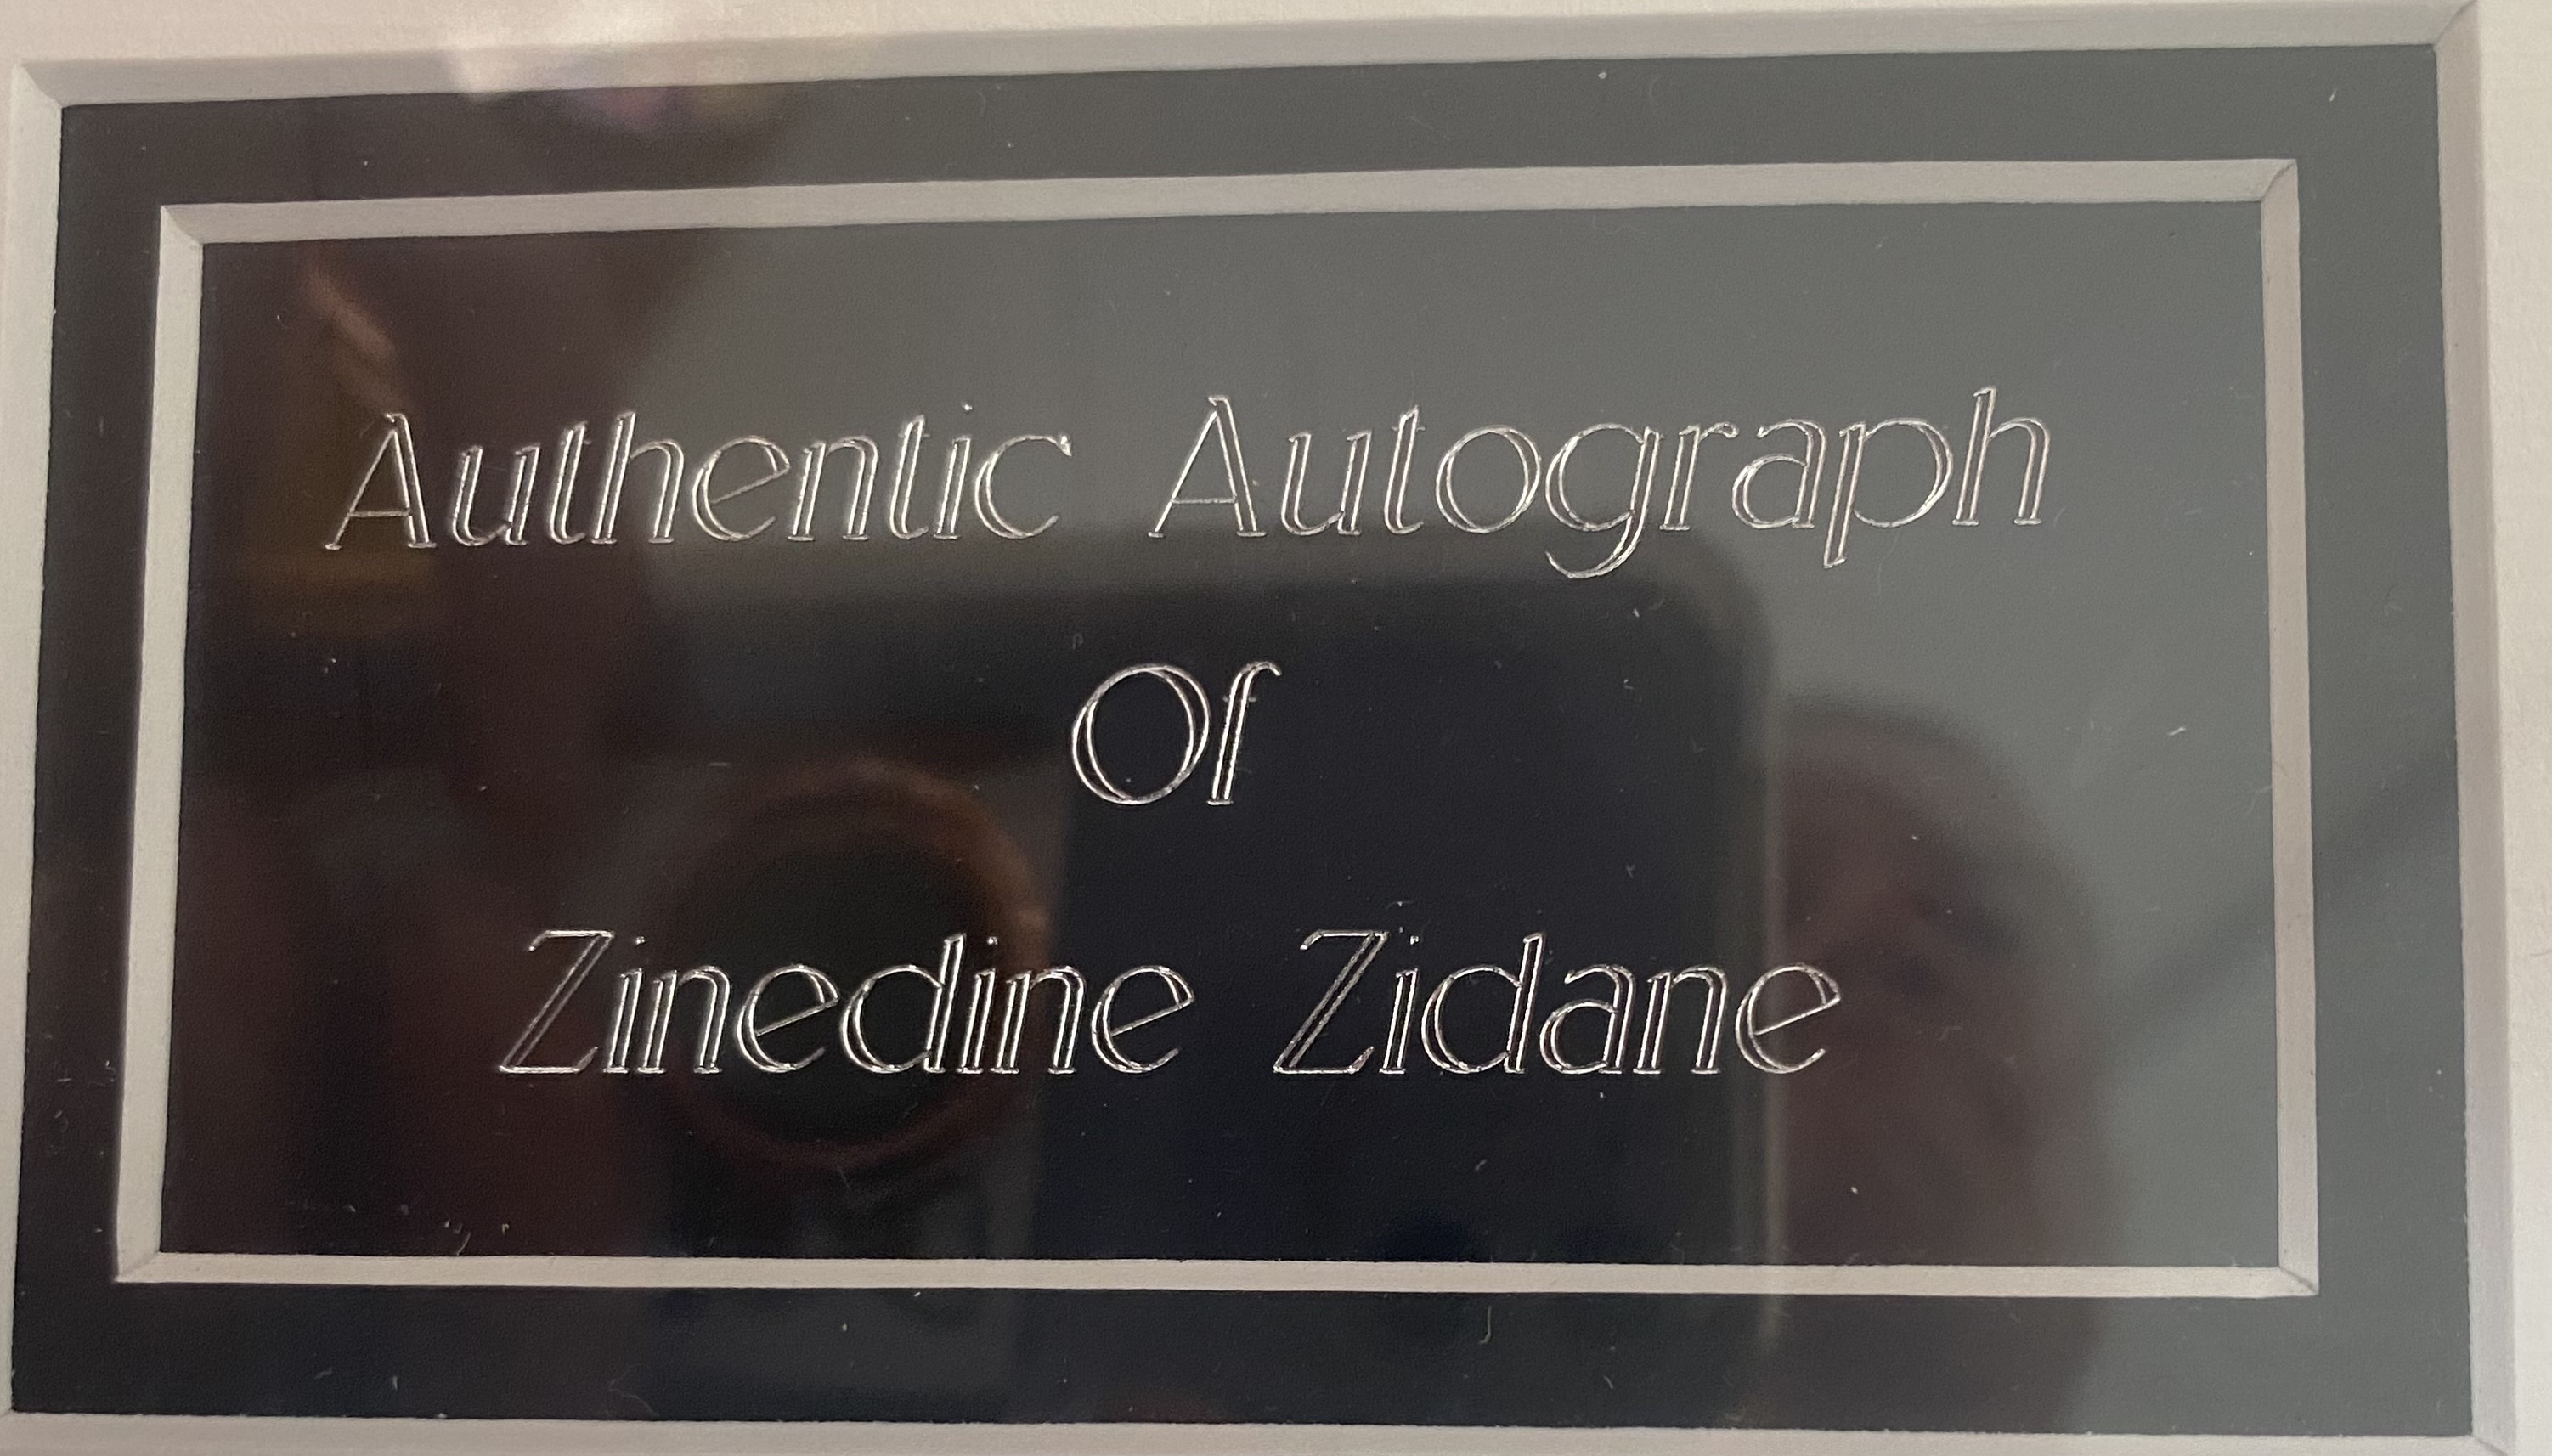 Football Zinedine Zidane signed 22x21 inch framed and mounted signature piece includes signed colour - Image 2 of 2